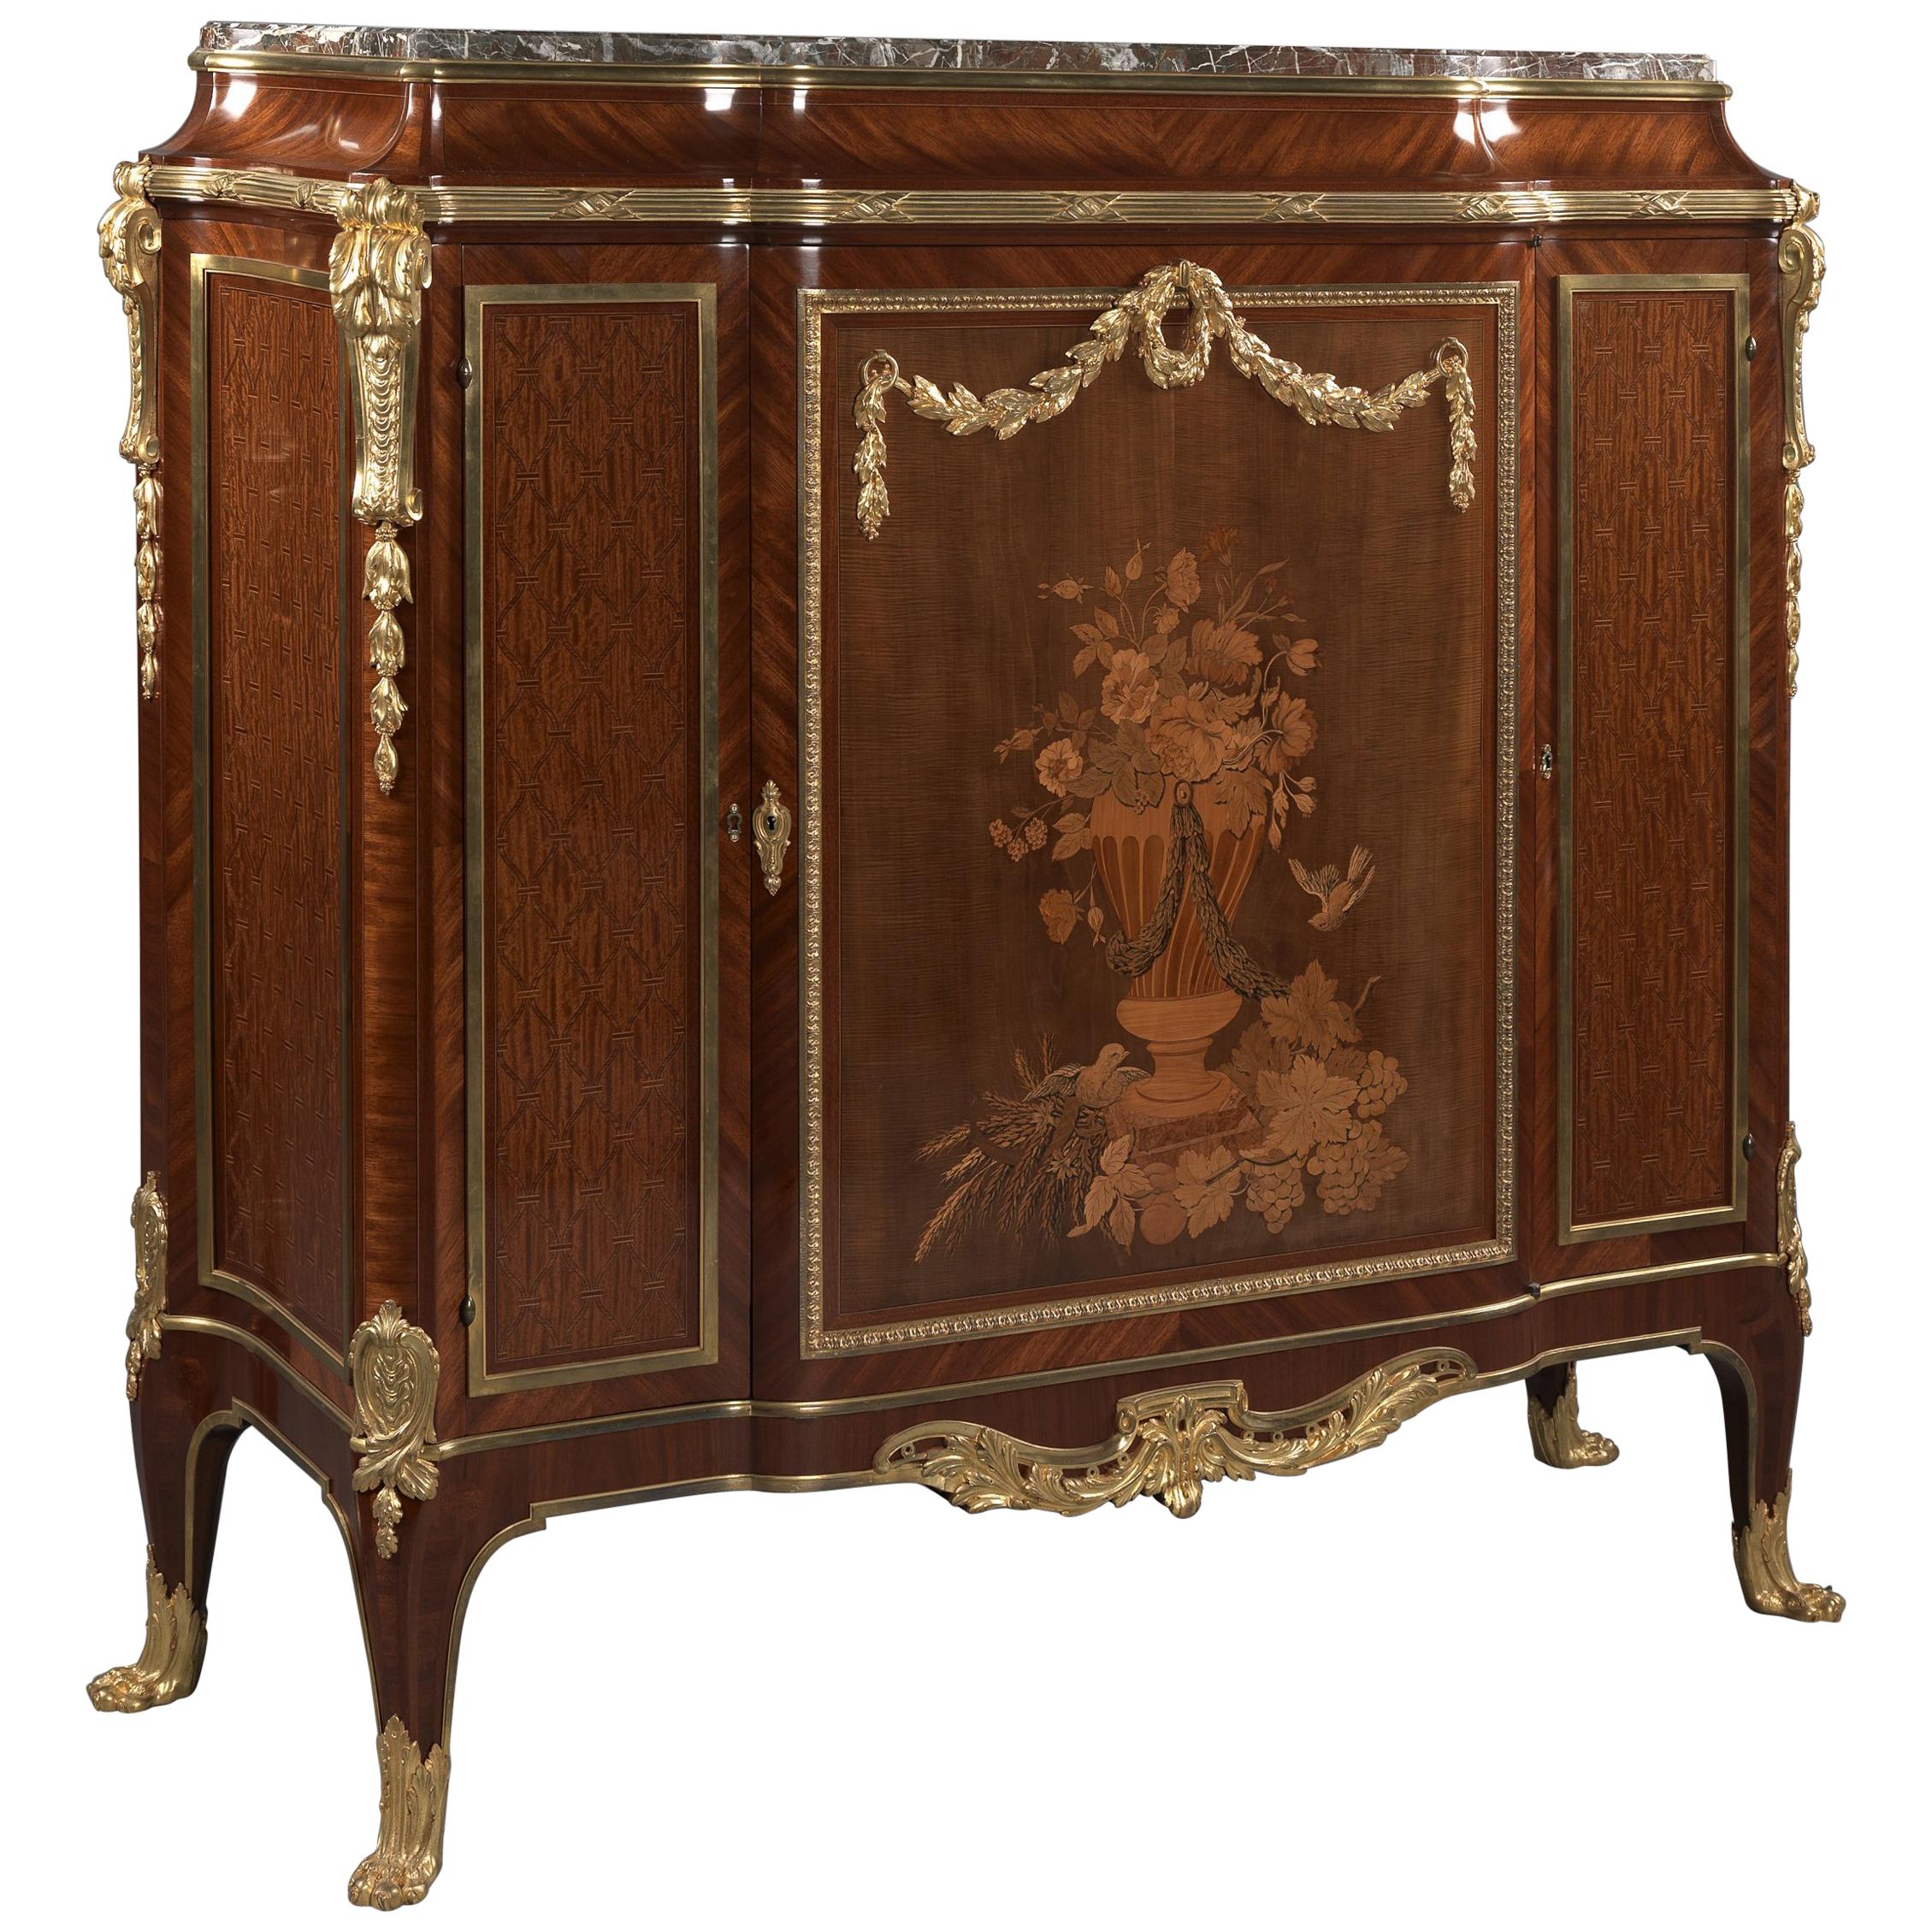 Transitional Style Marquetry-Inlaid Side Cabinet with a Marble Top, Dated 1912 For Sale